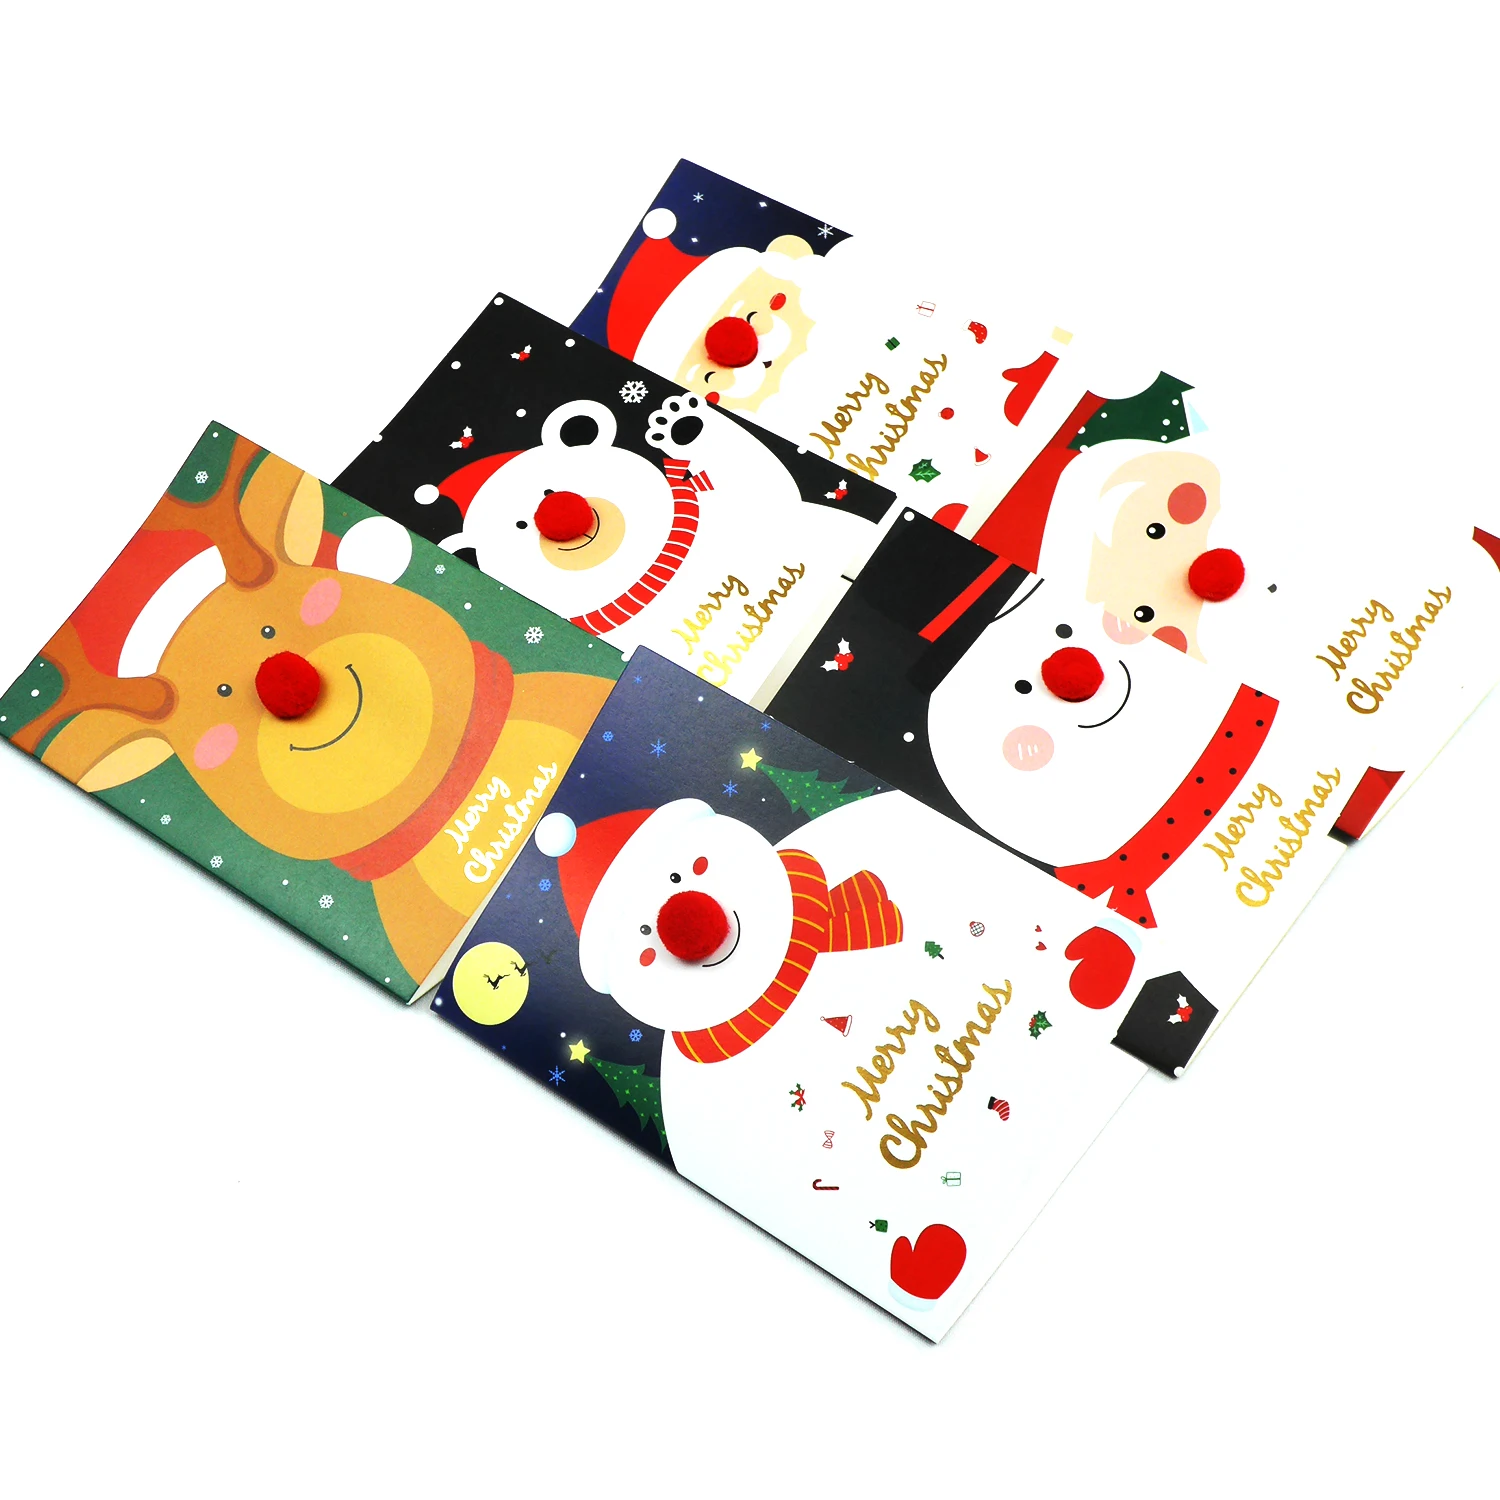 

6 Piece Cute Animal Wintertime Greeting Cards Collection with 6 Unique Festive Designs & Envelopes for Winter Christmas Season